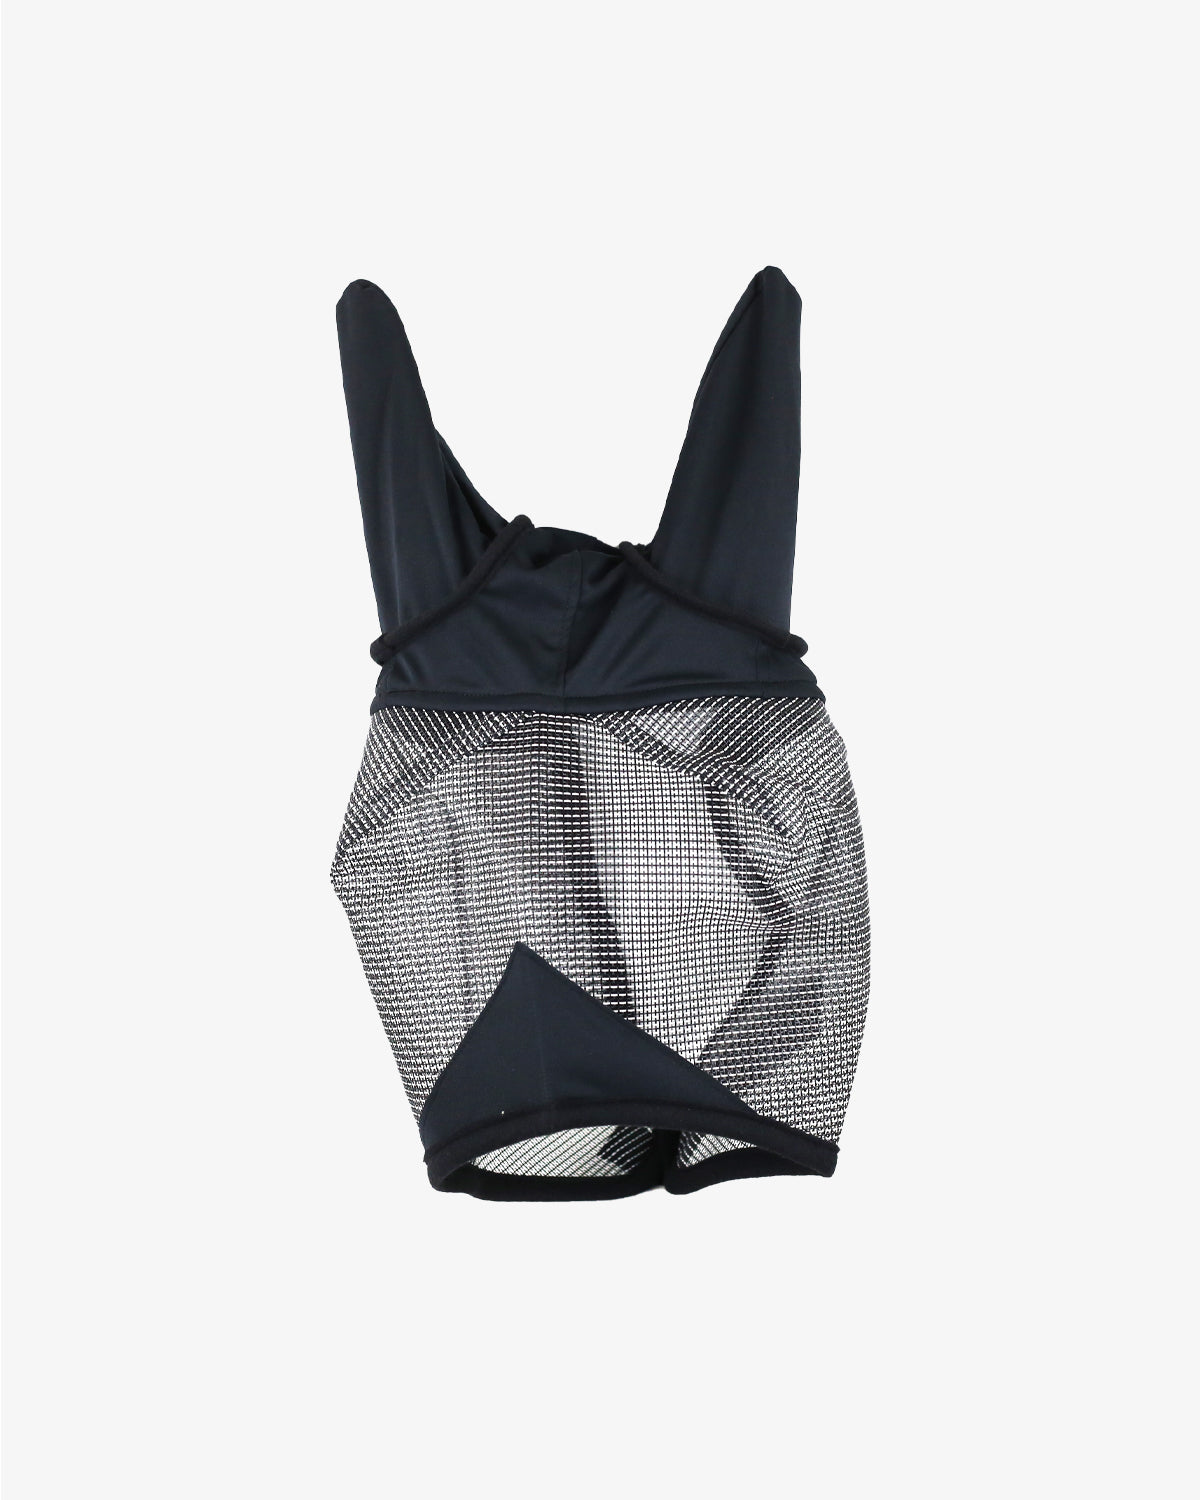 Mesh Fly Mask with Ear Cover